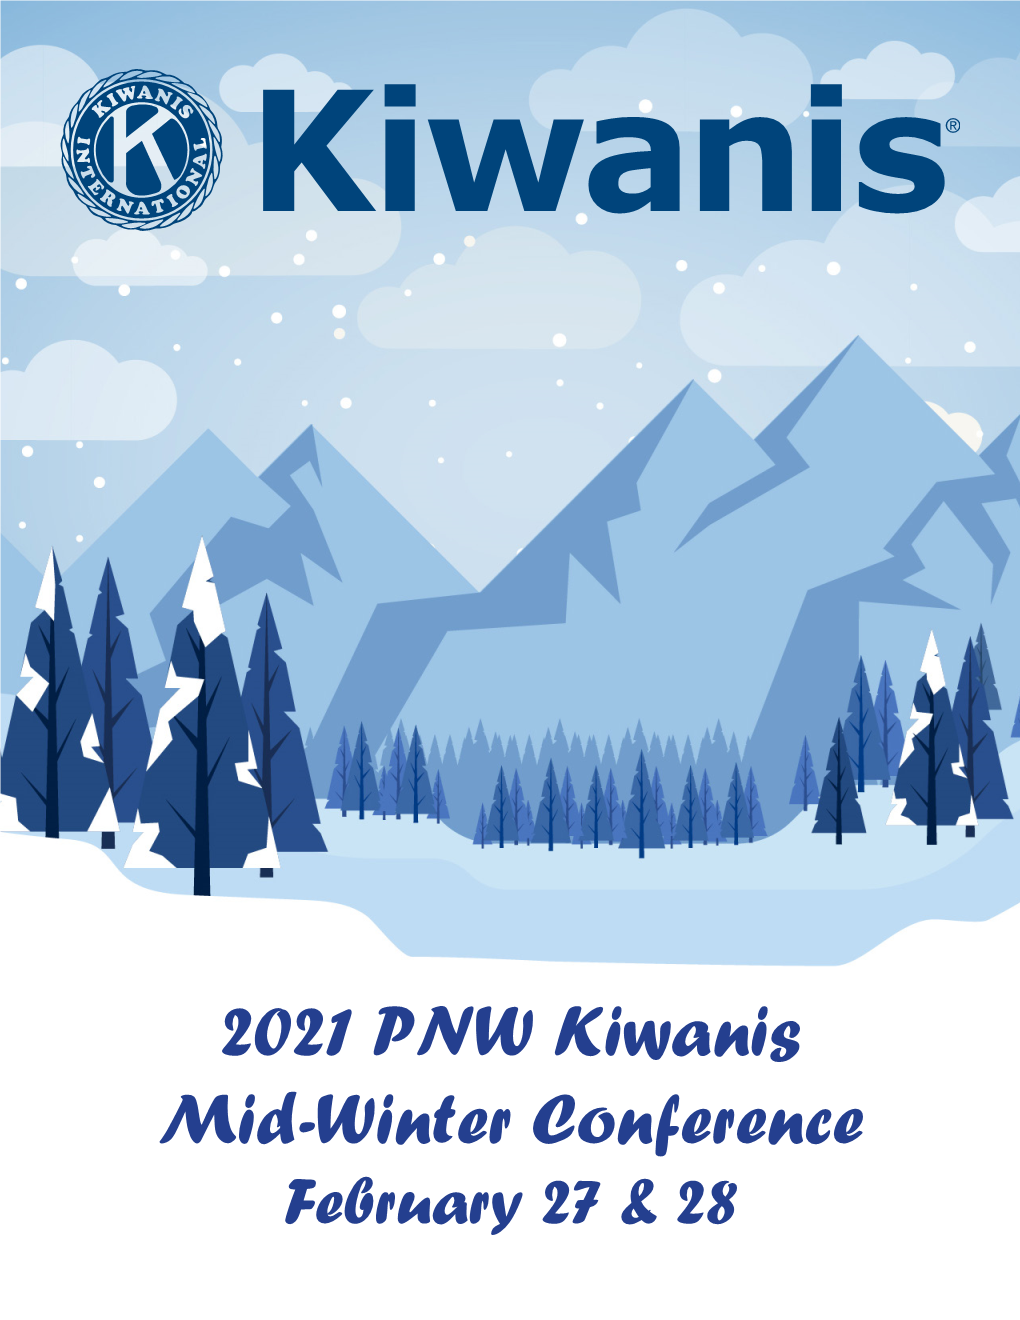 2021 PNW Kiwanis Mid-Winter Conference February 27 & 28 WELCOME!